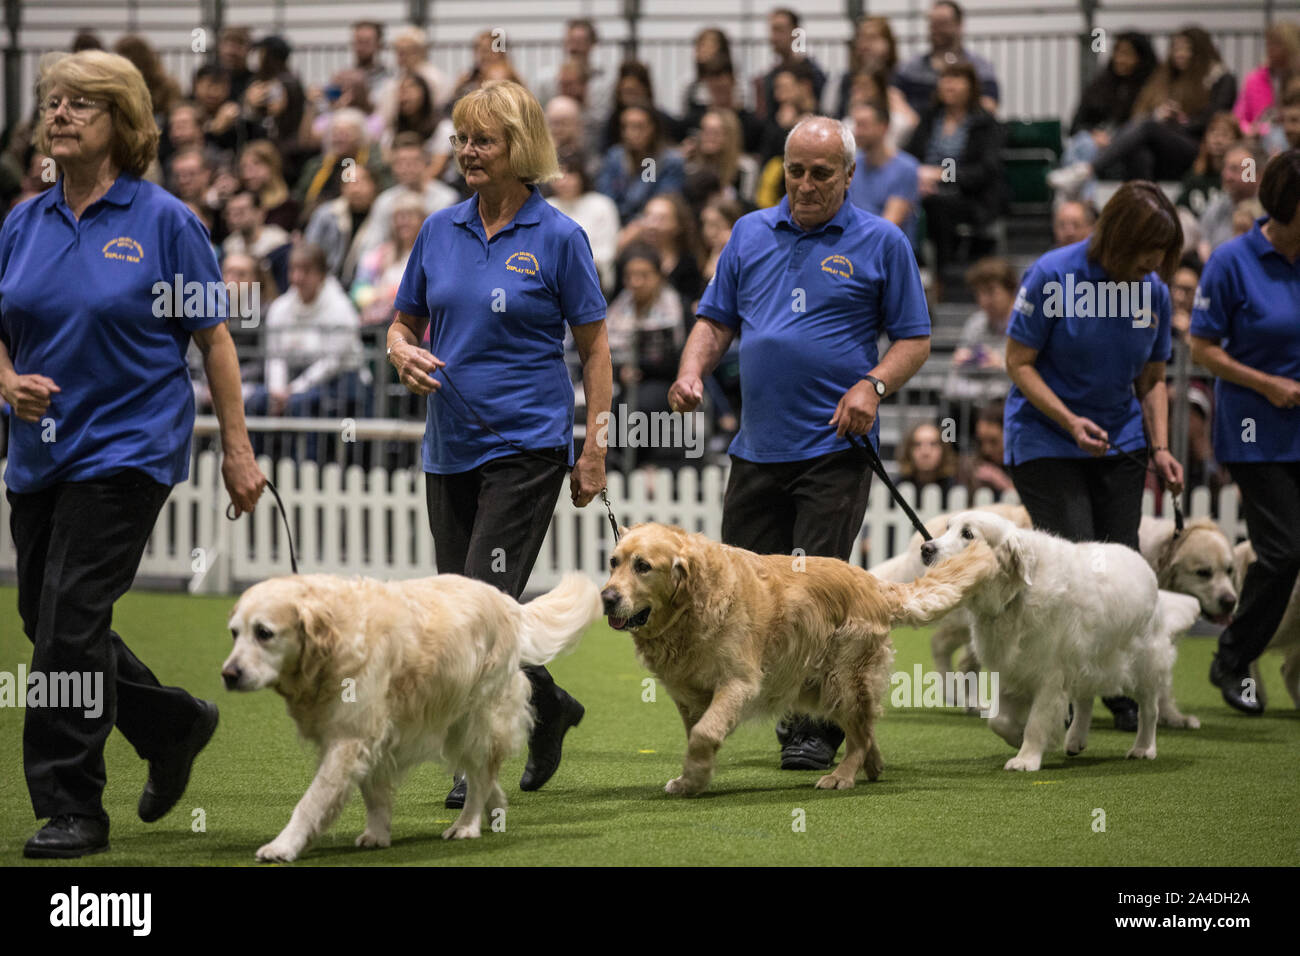 The Kennel Club Discovery Dogs exhibition at Excel London, UK Picture shows Southern Golden Retriever Display Team. Stock Photo